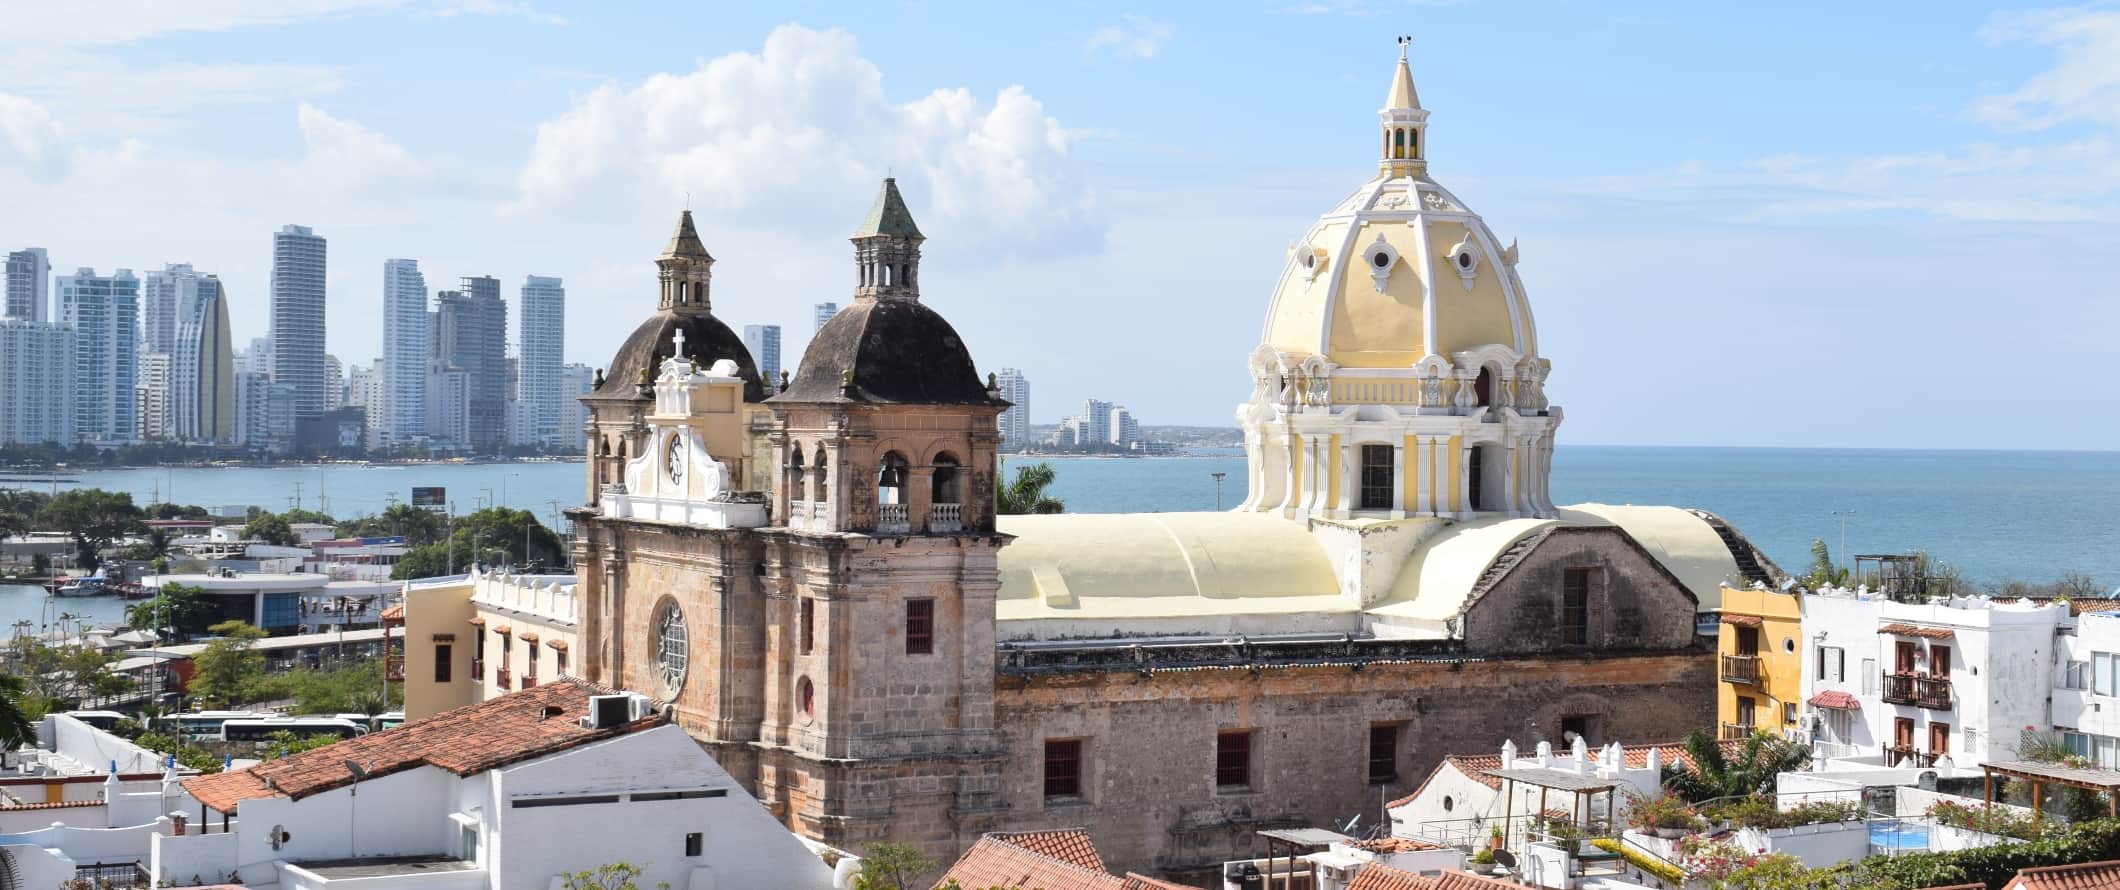 View over the walled city of Cartagena, Colombia, with a large historic domed church in the foreground and modern skyscrapers in the background